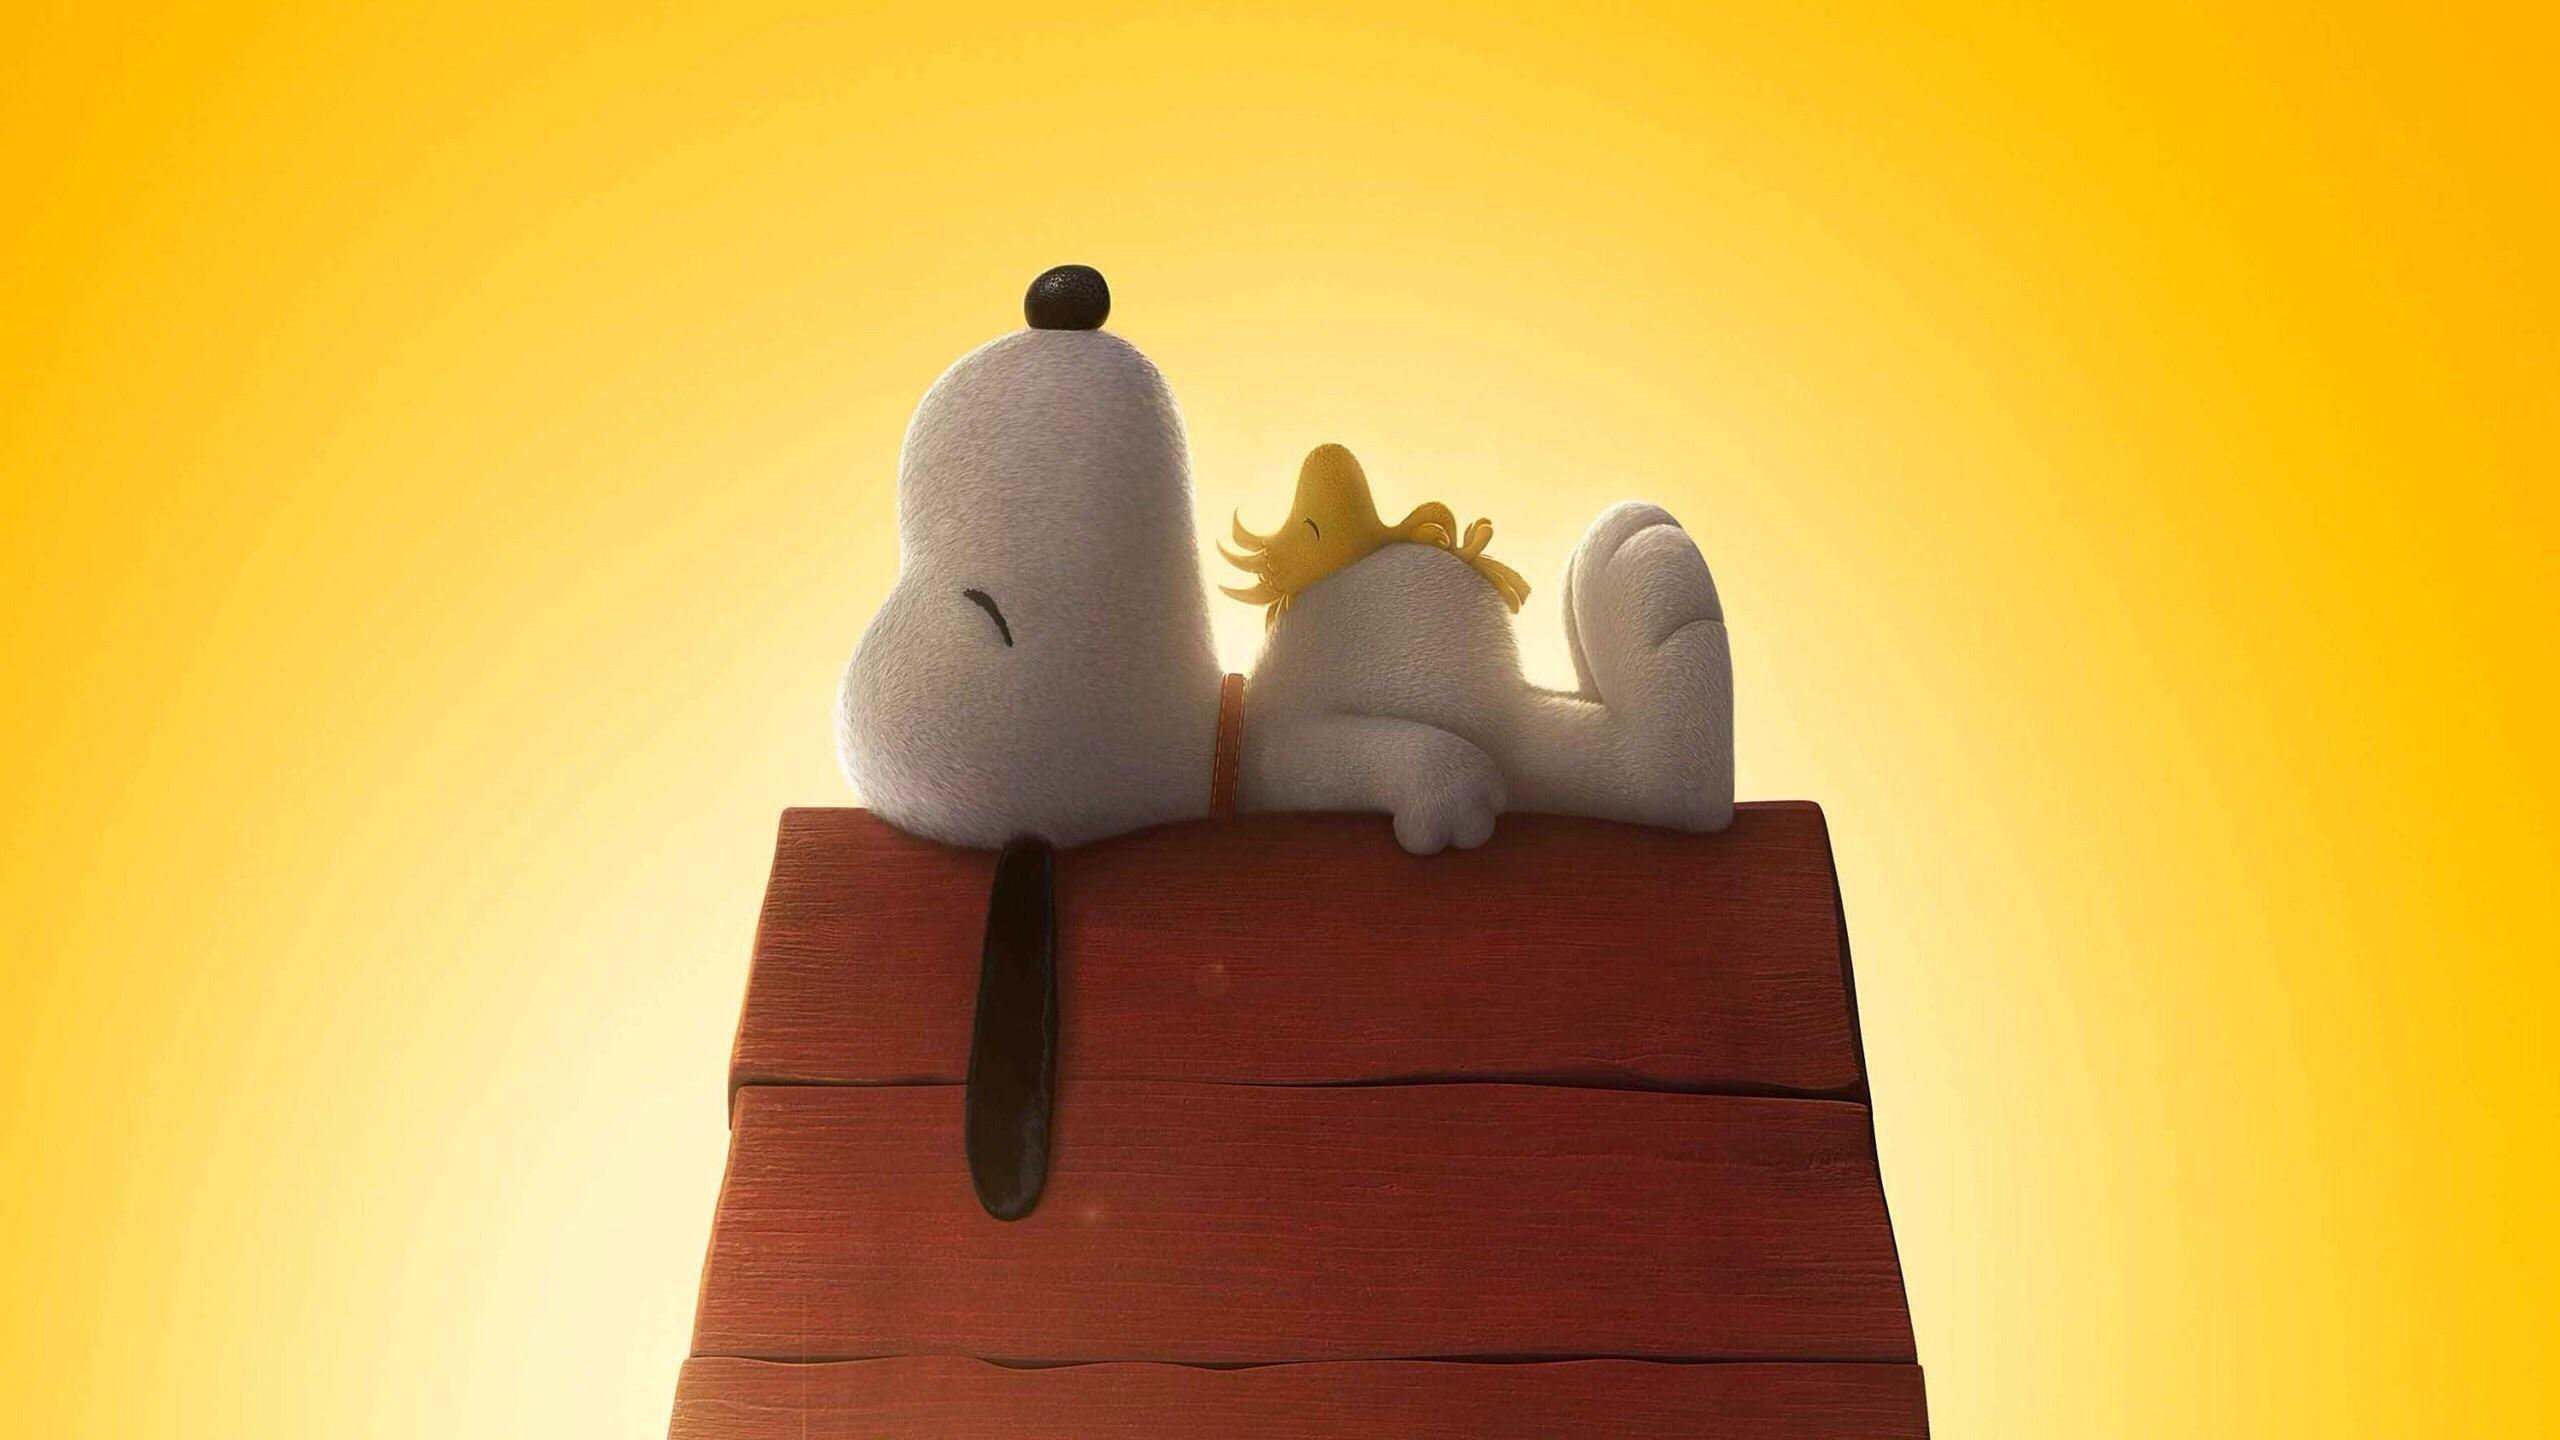 Snoopy 4K Wallpapers - Top Free Snoopy 4K Backgrounds - WallpaperAccess